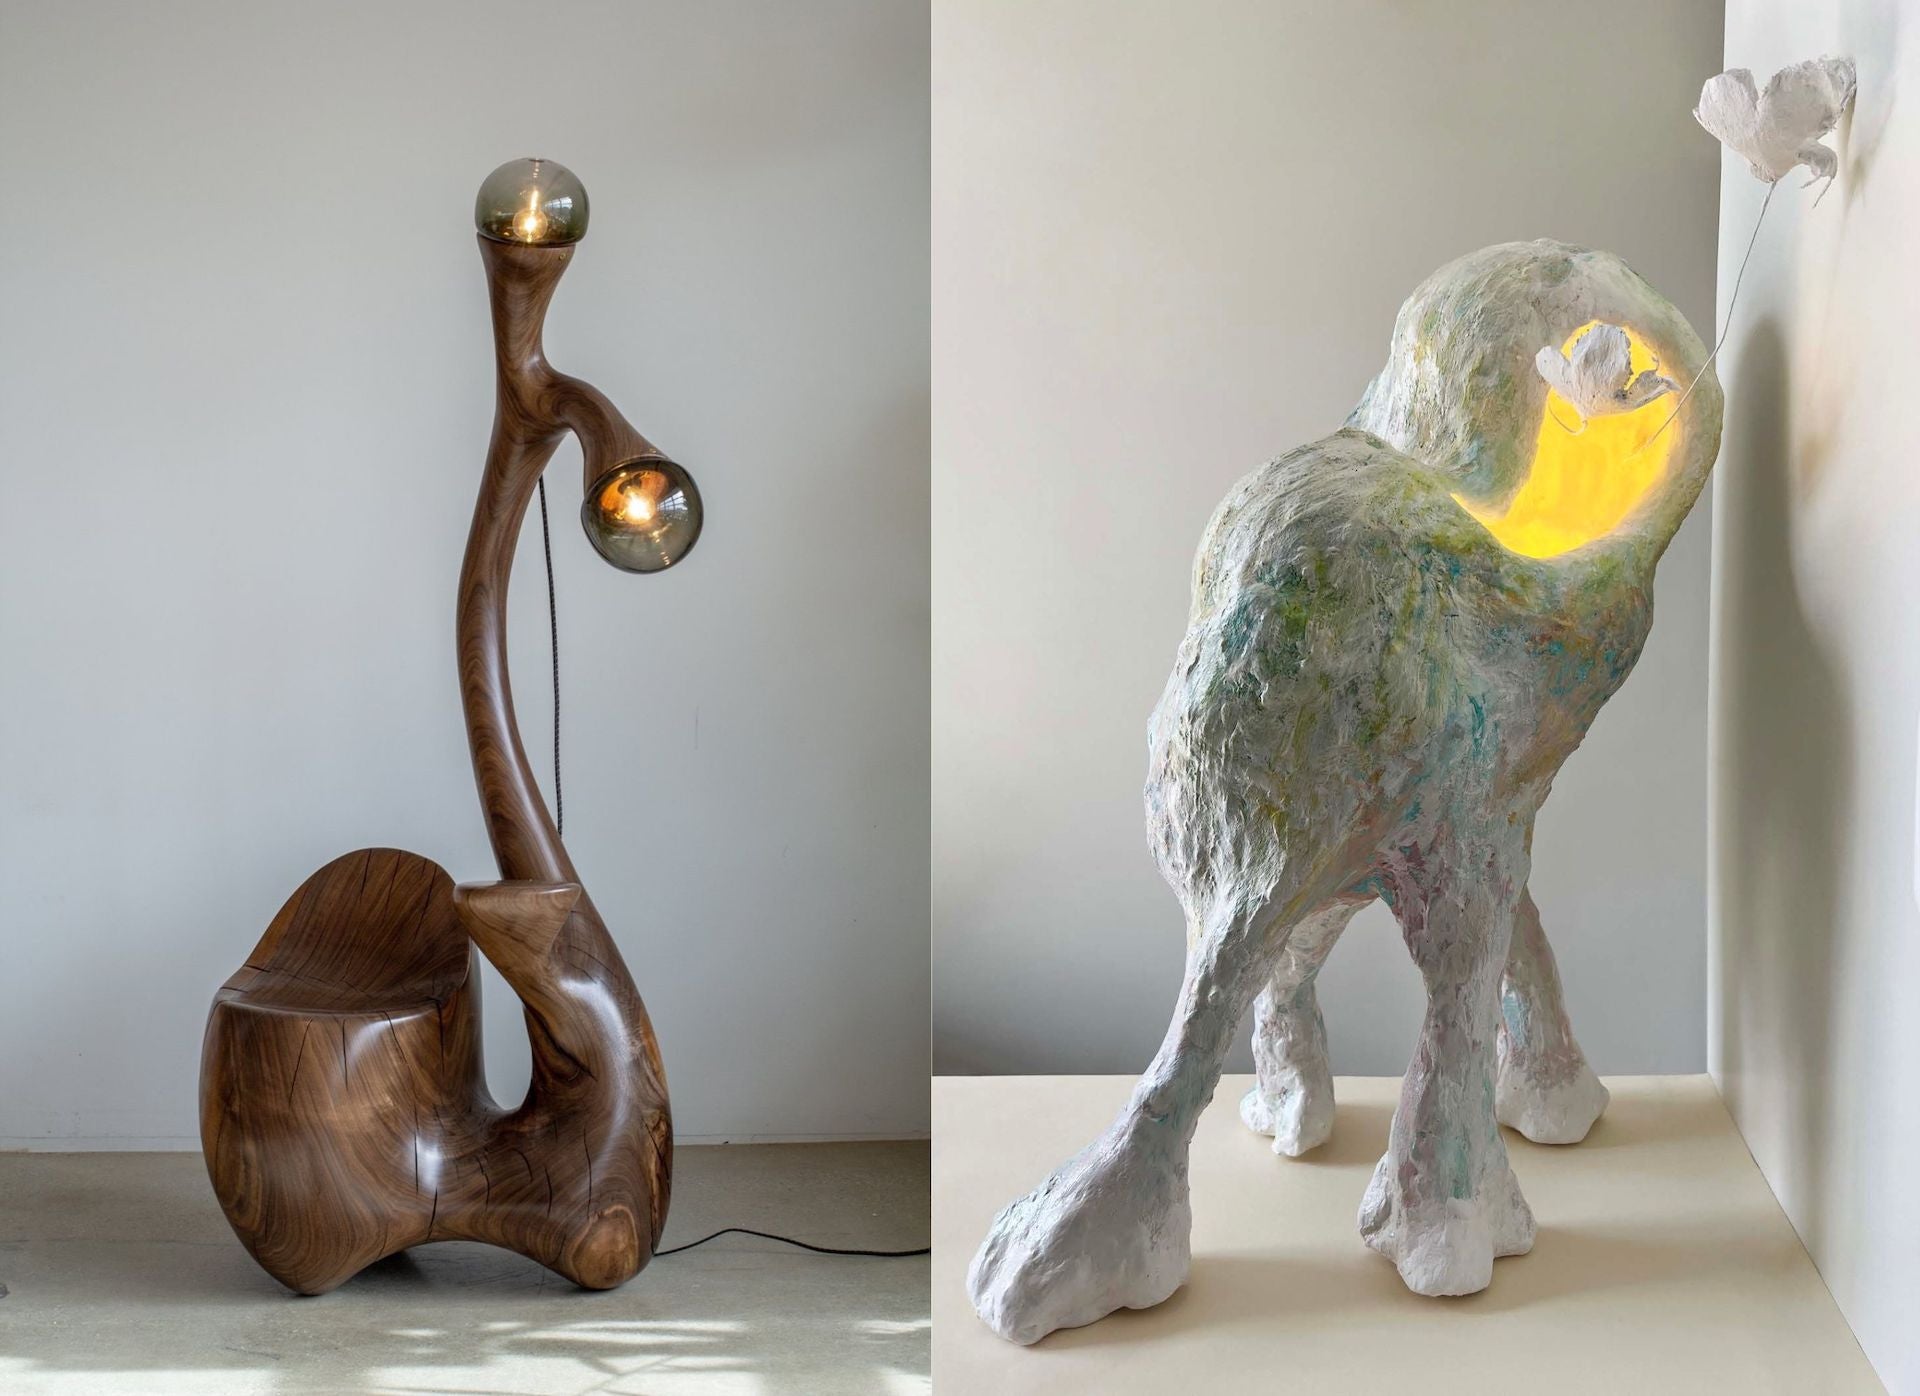 From left: Sculptural Floor Lamp by Aaron Poritz and Whisperer by Xiao Mao, on view this month at Cristina Grajales in New York. Photos courtesy of Cristina Grajales